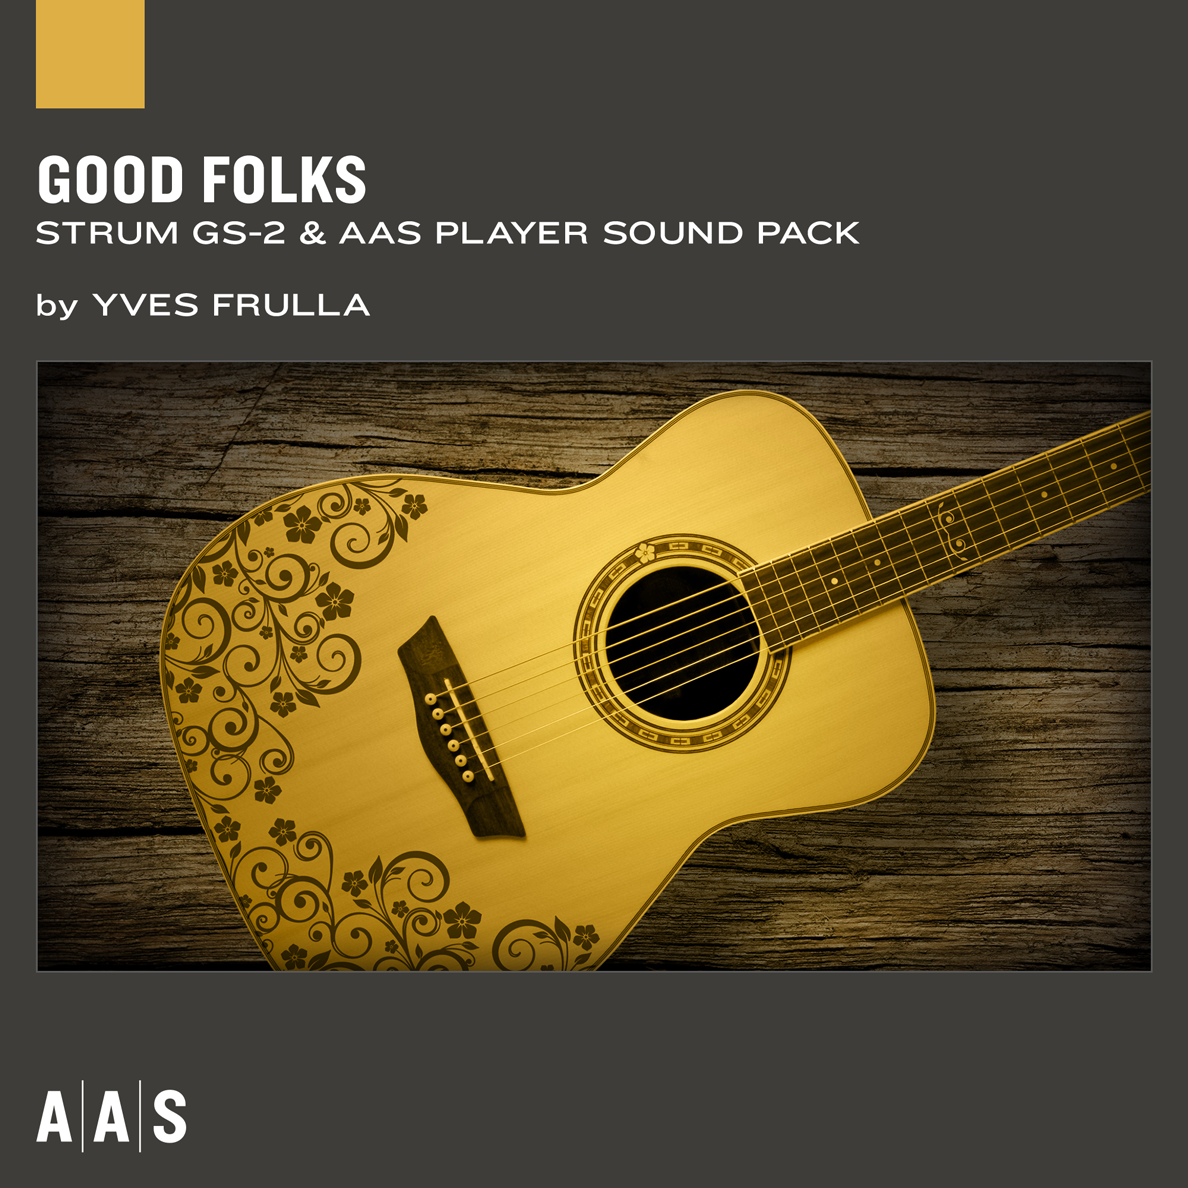 Strum and AAS Player sound pack ： Good Folks